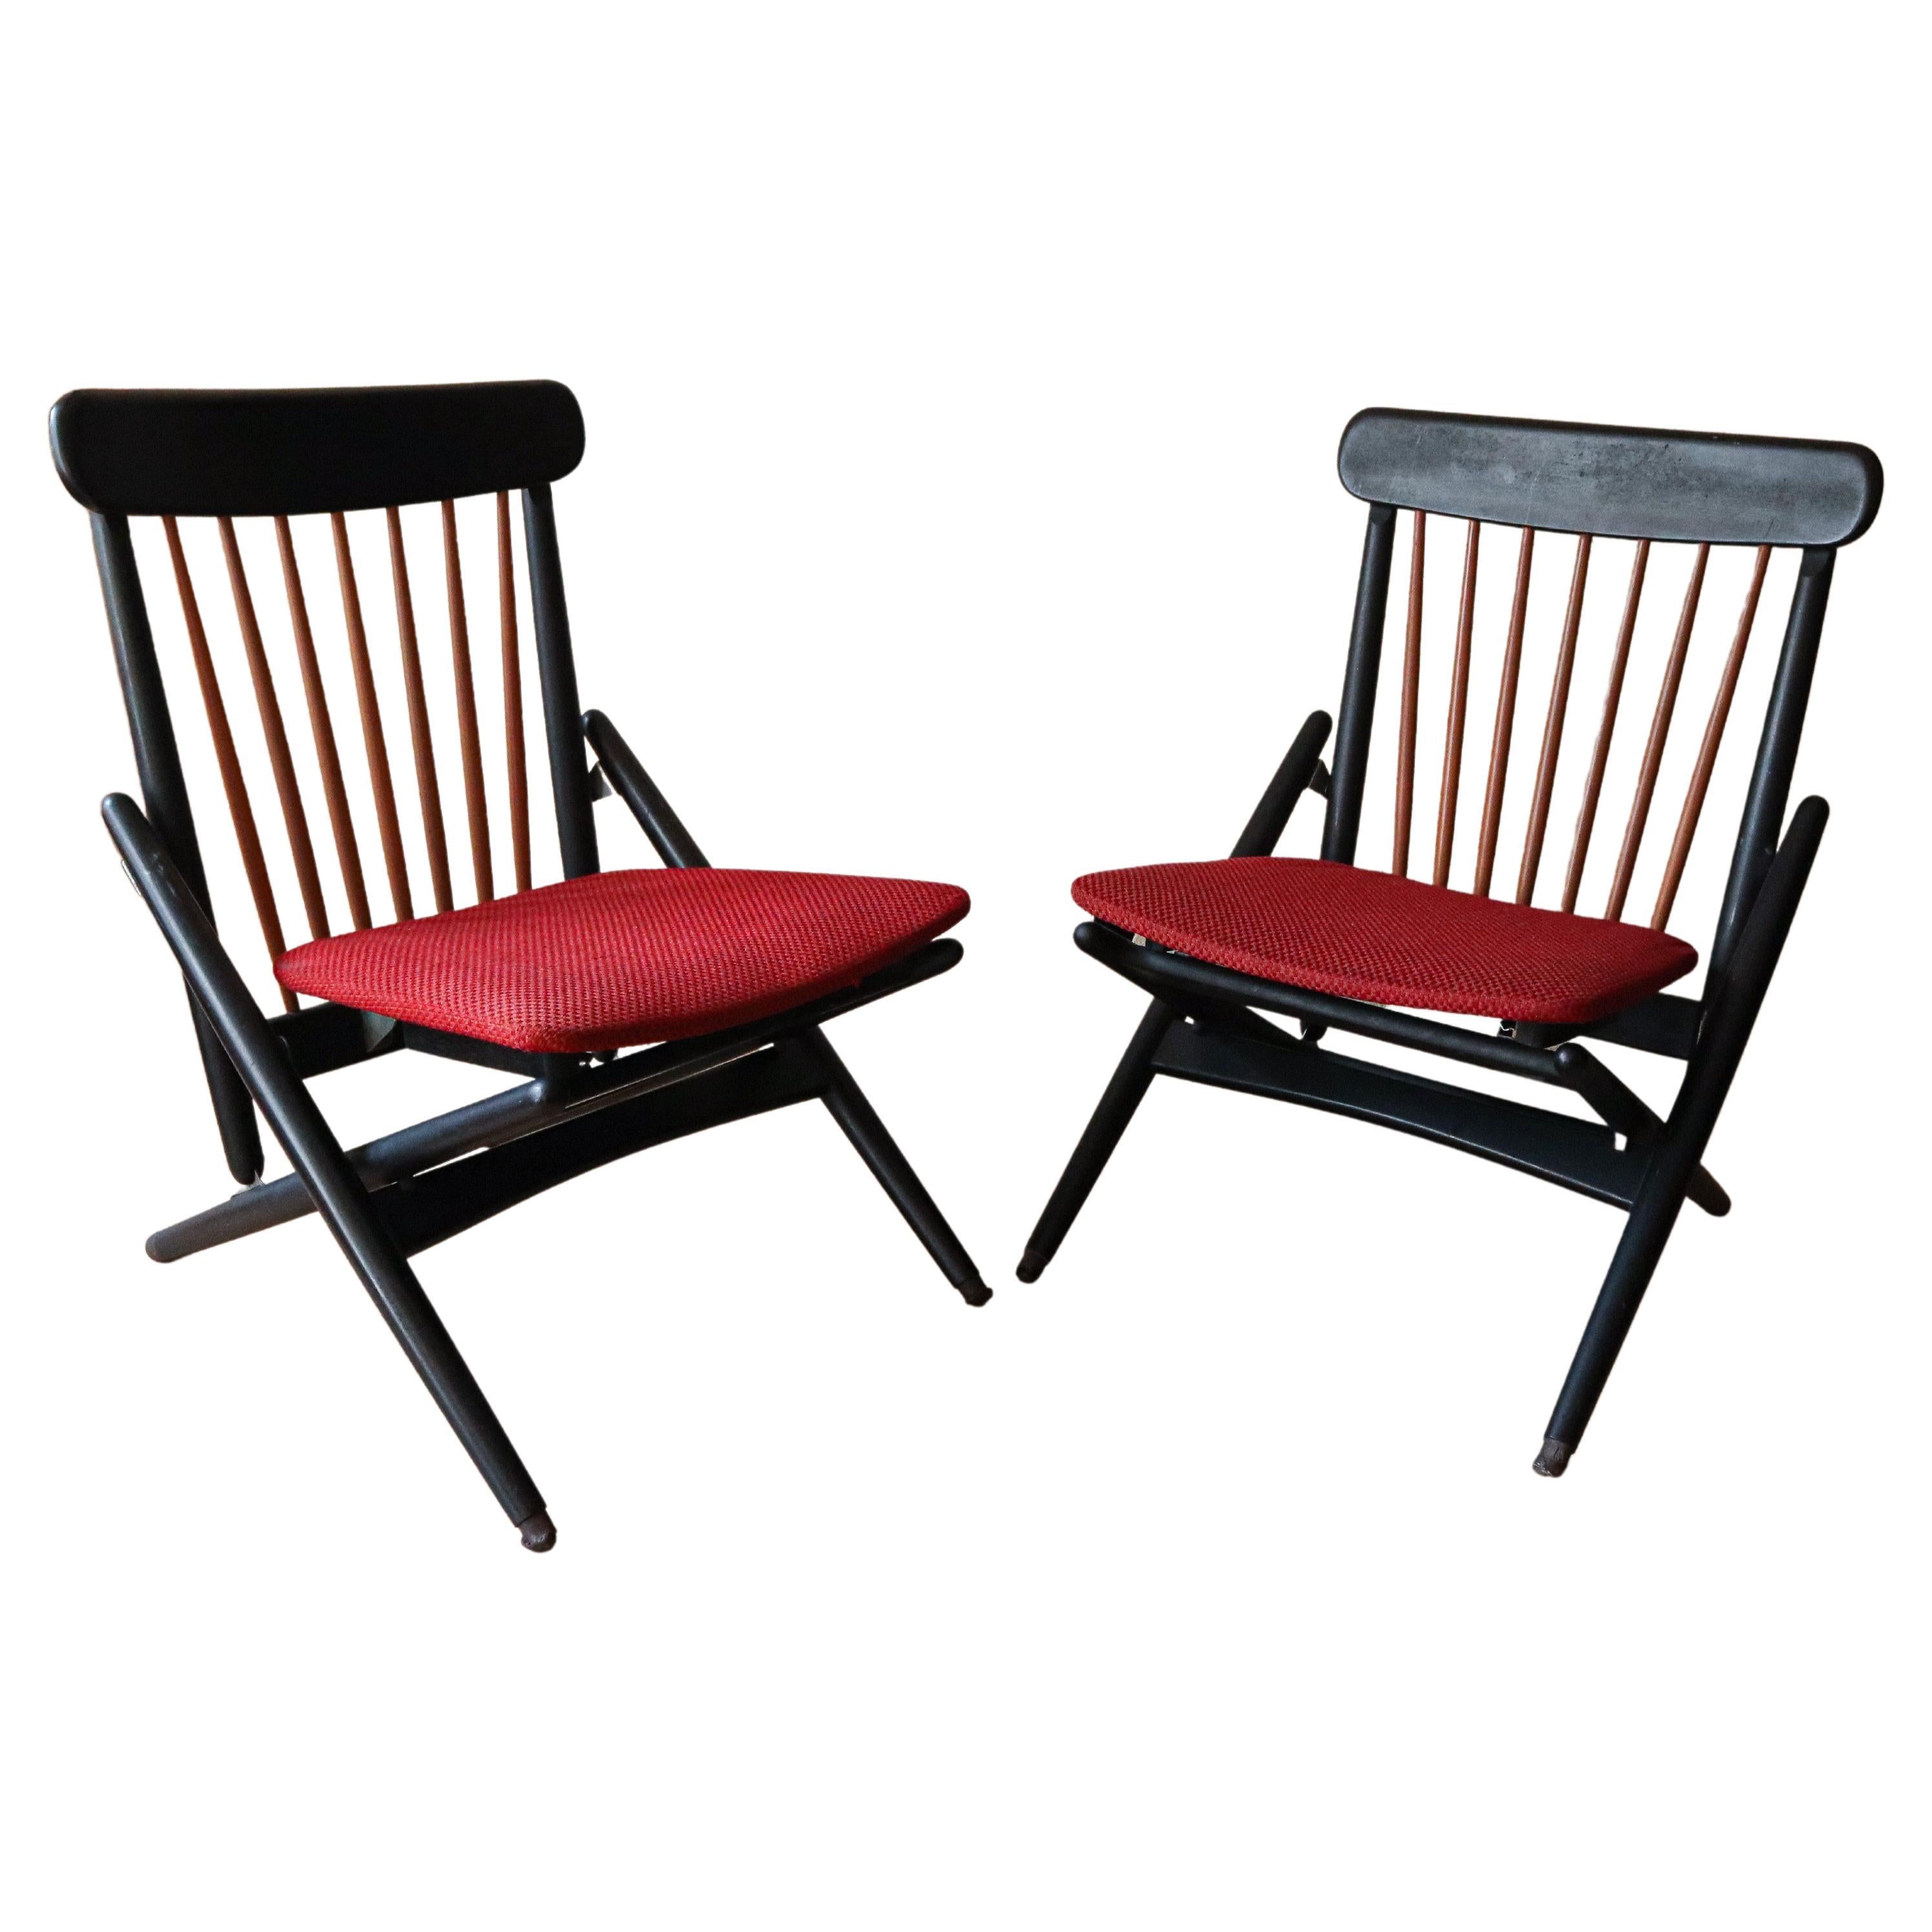 Japanese Midcentury Rare Pair of Maruni Folding Lounge Chairs For Sale